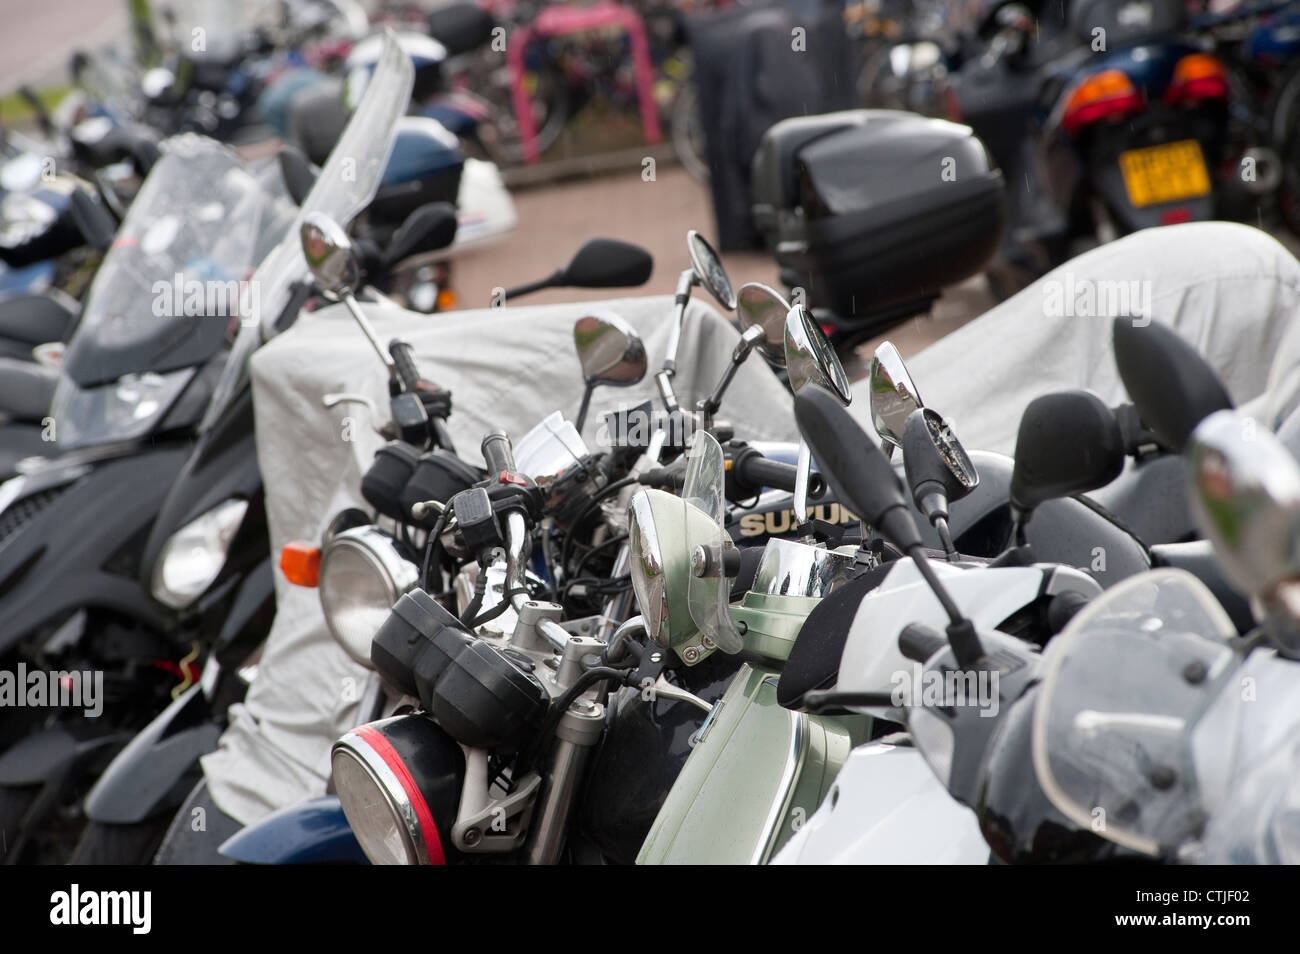 Motorbikes parked securely in a parking area outside a railway station in England. Stock Photo